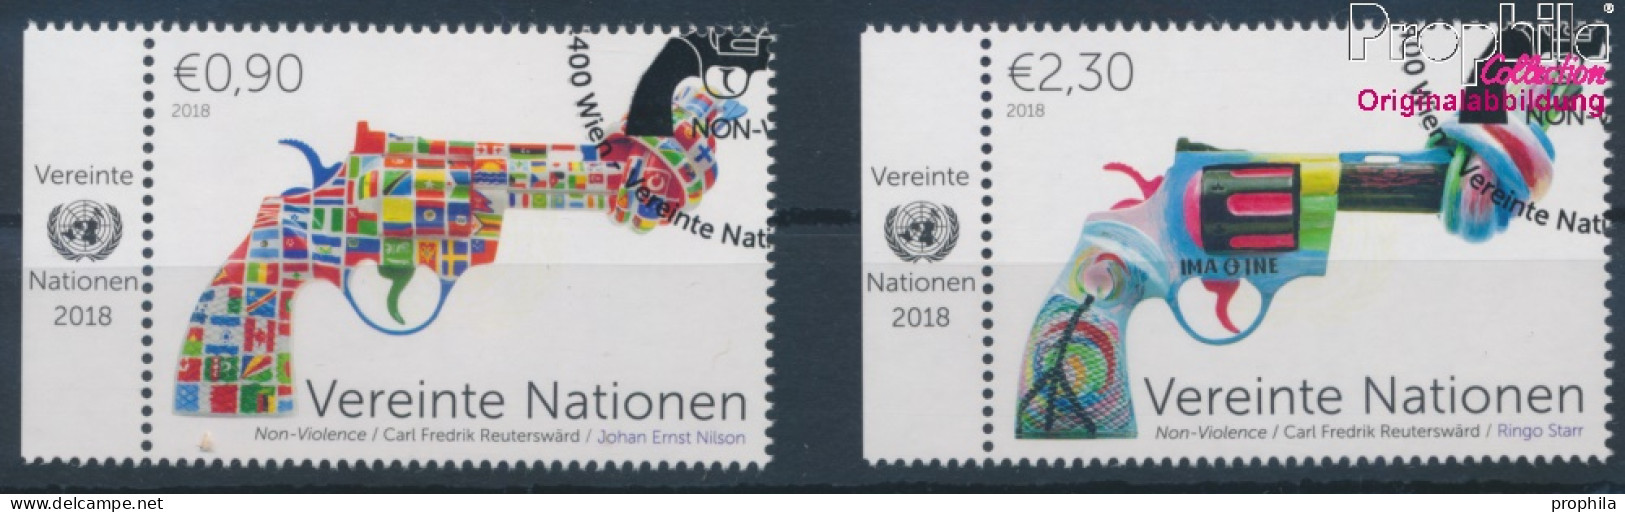 UNO - Wien 1041-1042 (kompl.Ausg.) Gestempelt 2018 Non Violence Project (10216425 - Used Stamps